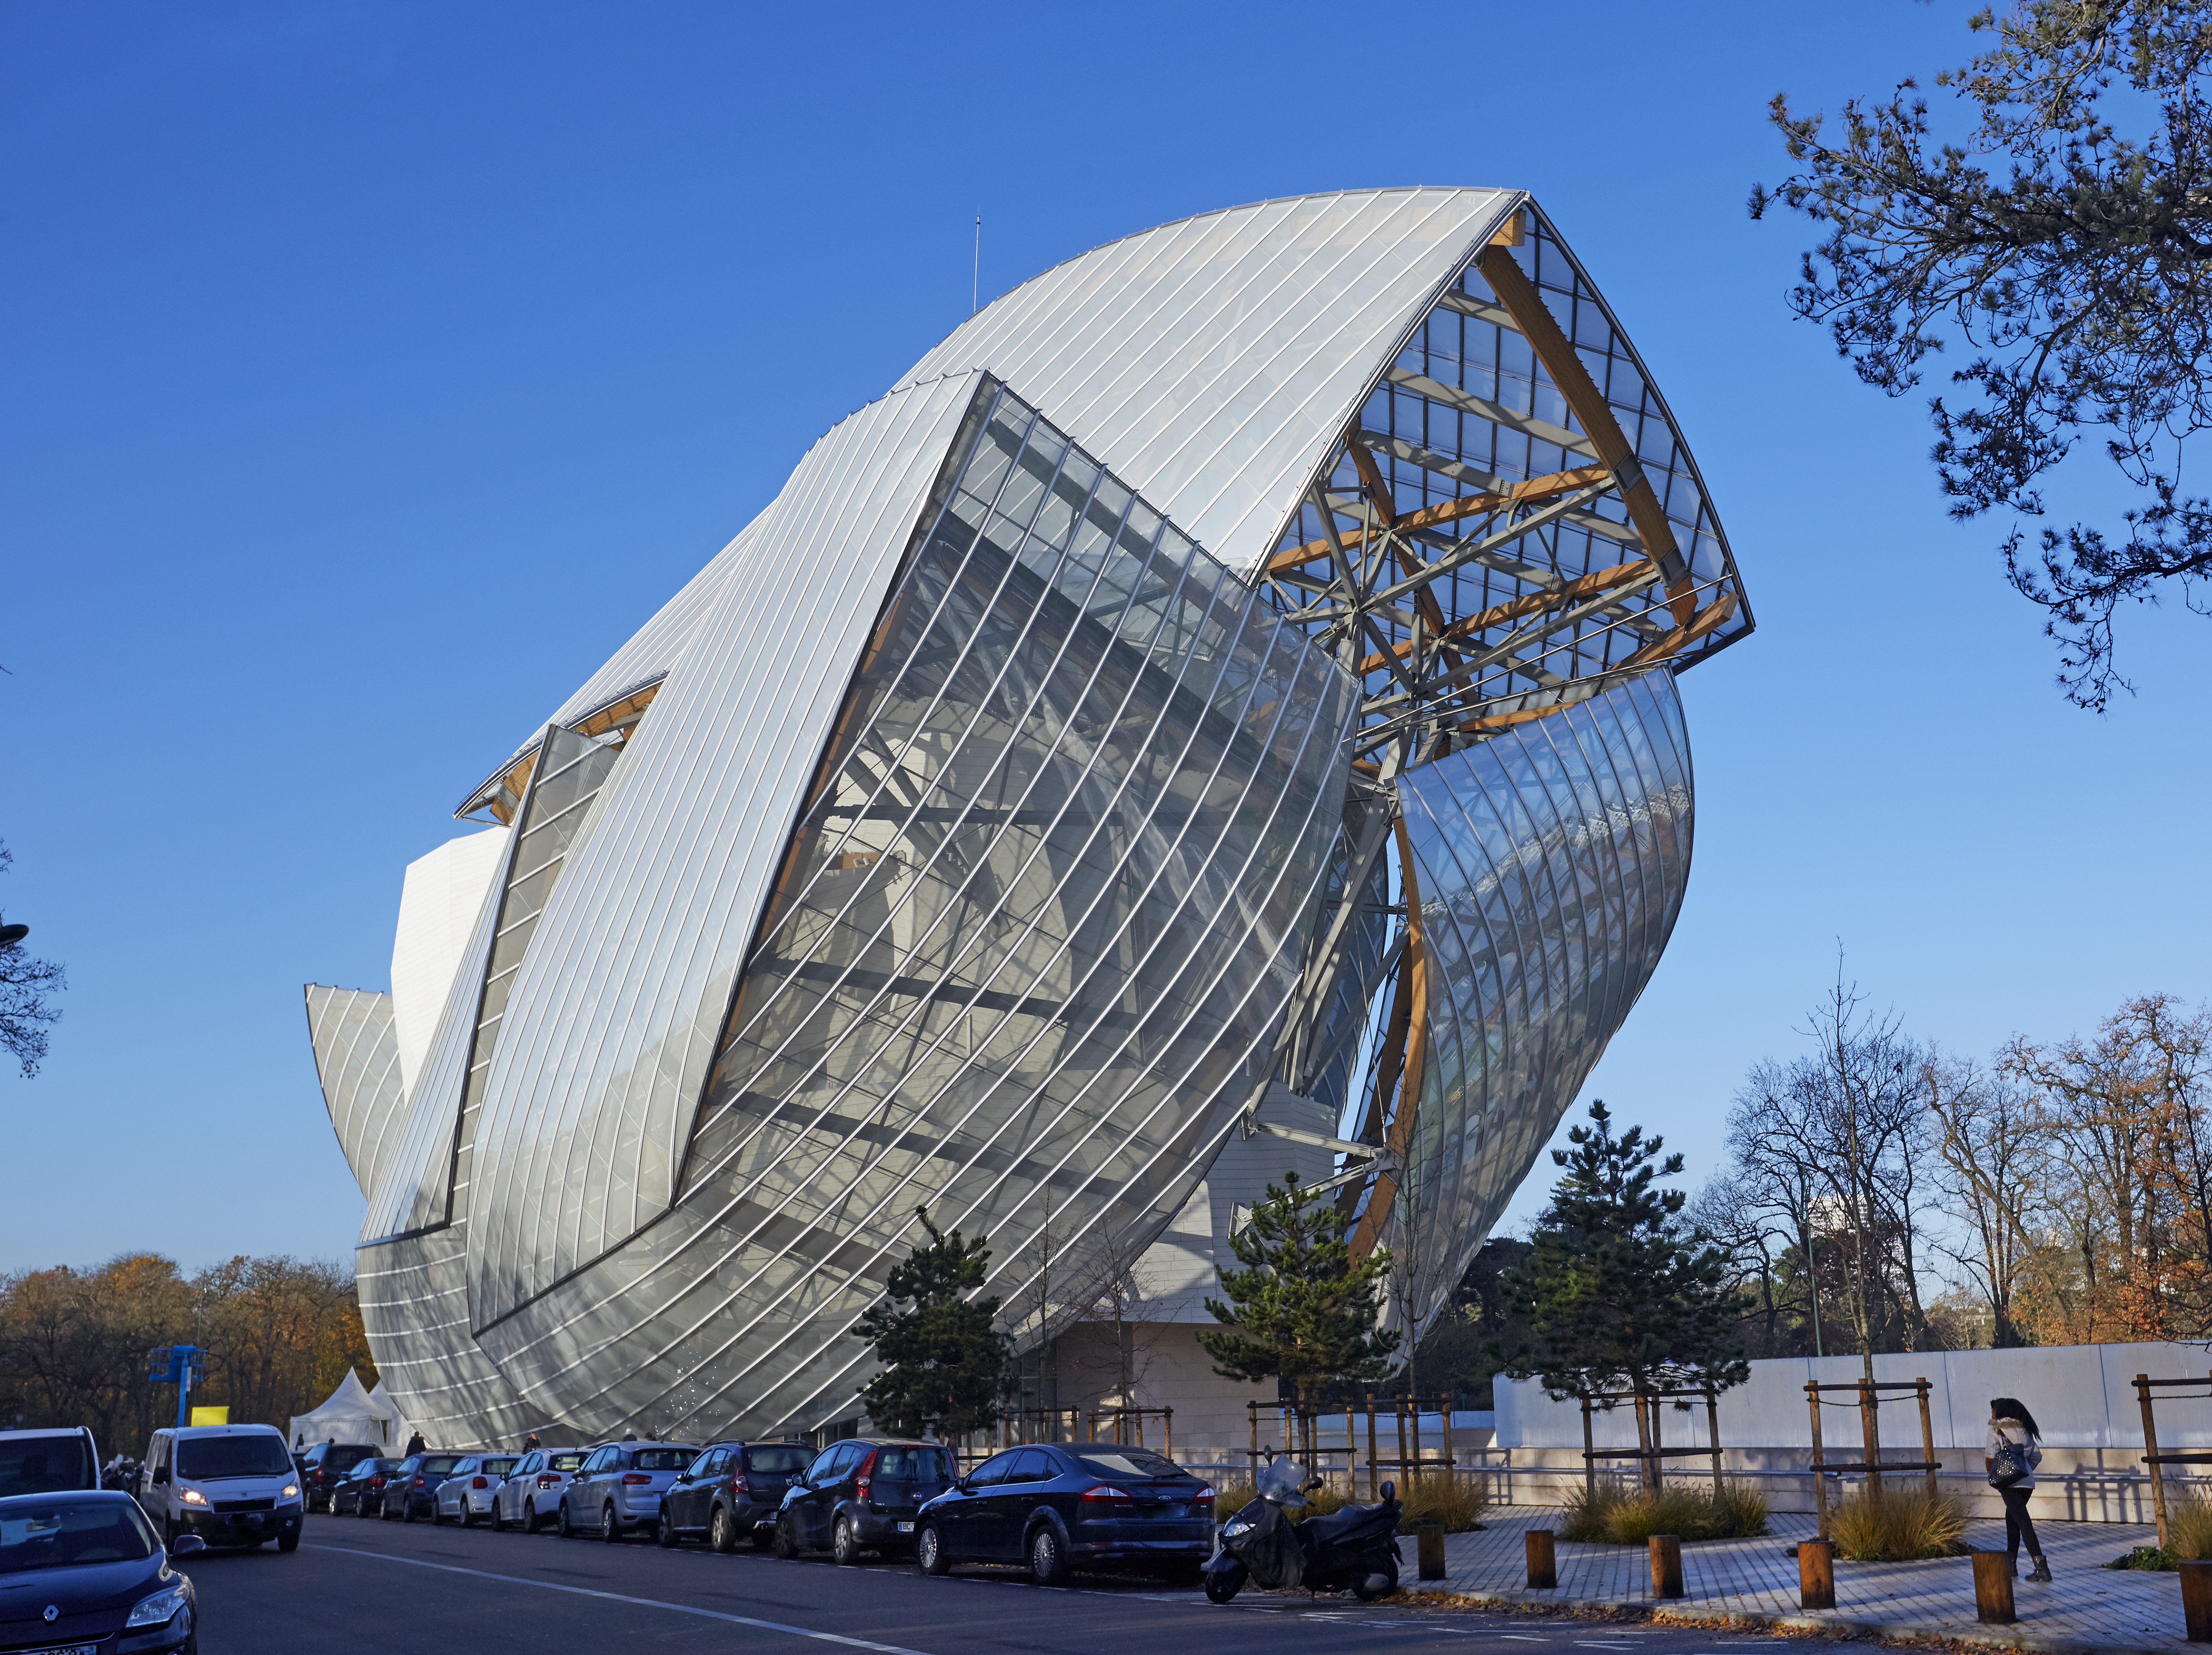 Three Great Reasons to Take the Kids to the Fondation Louis Vuitton  Les  LouvesLes Louves